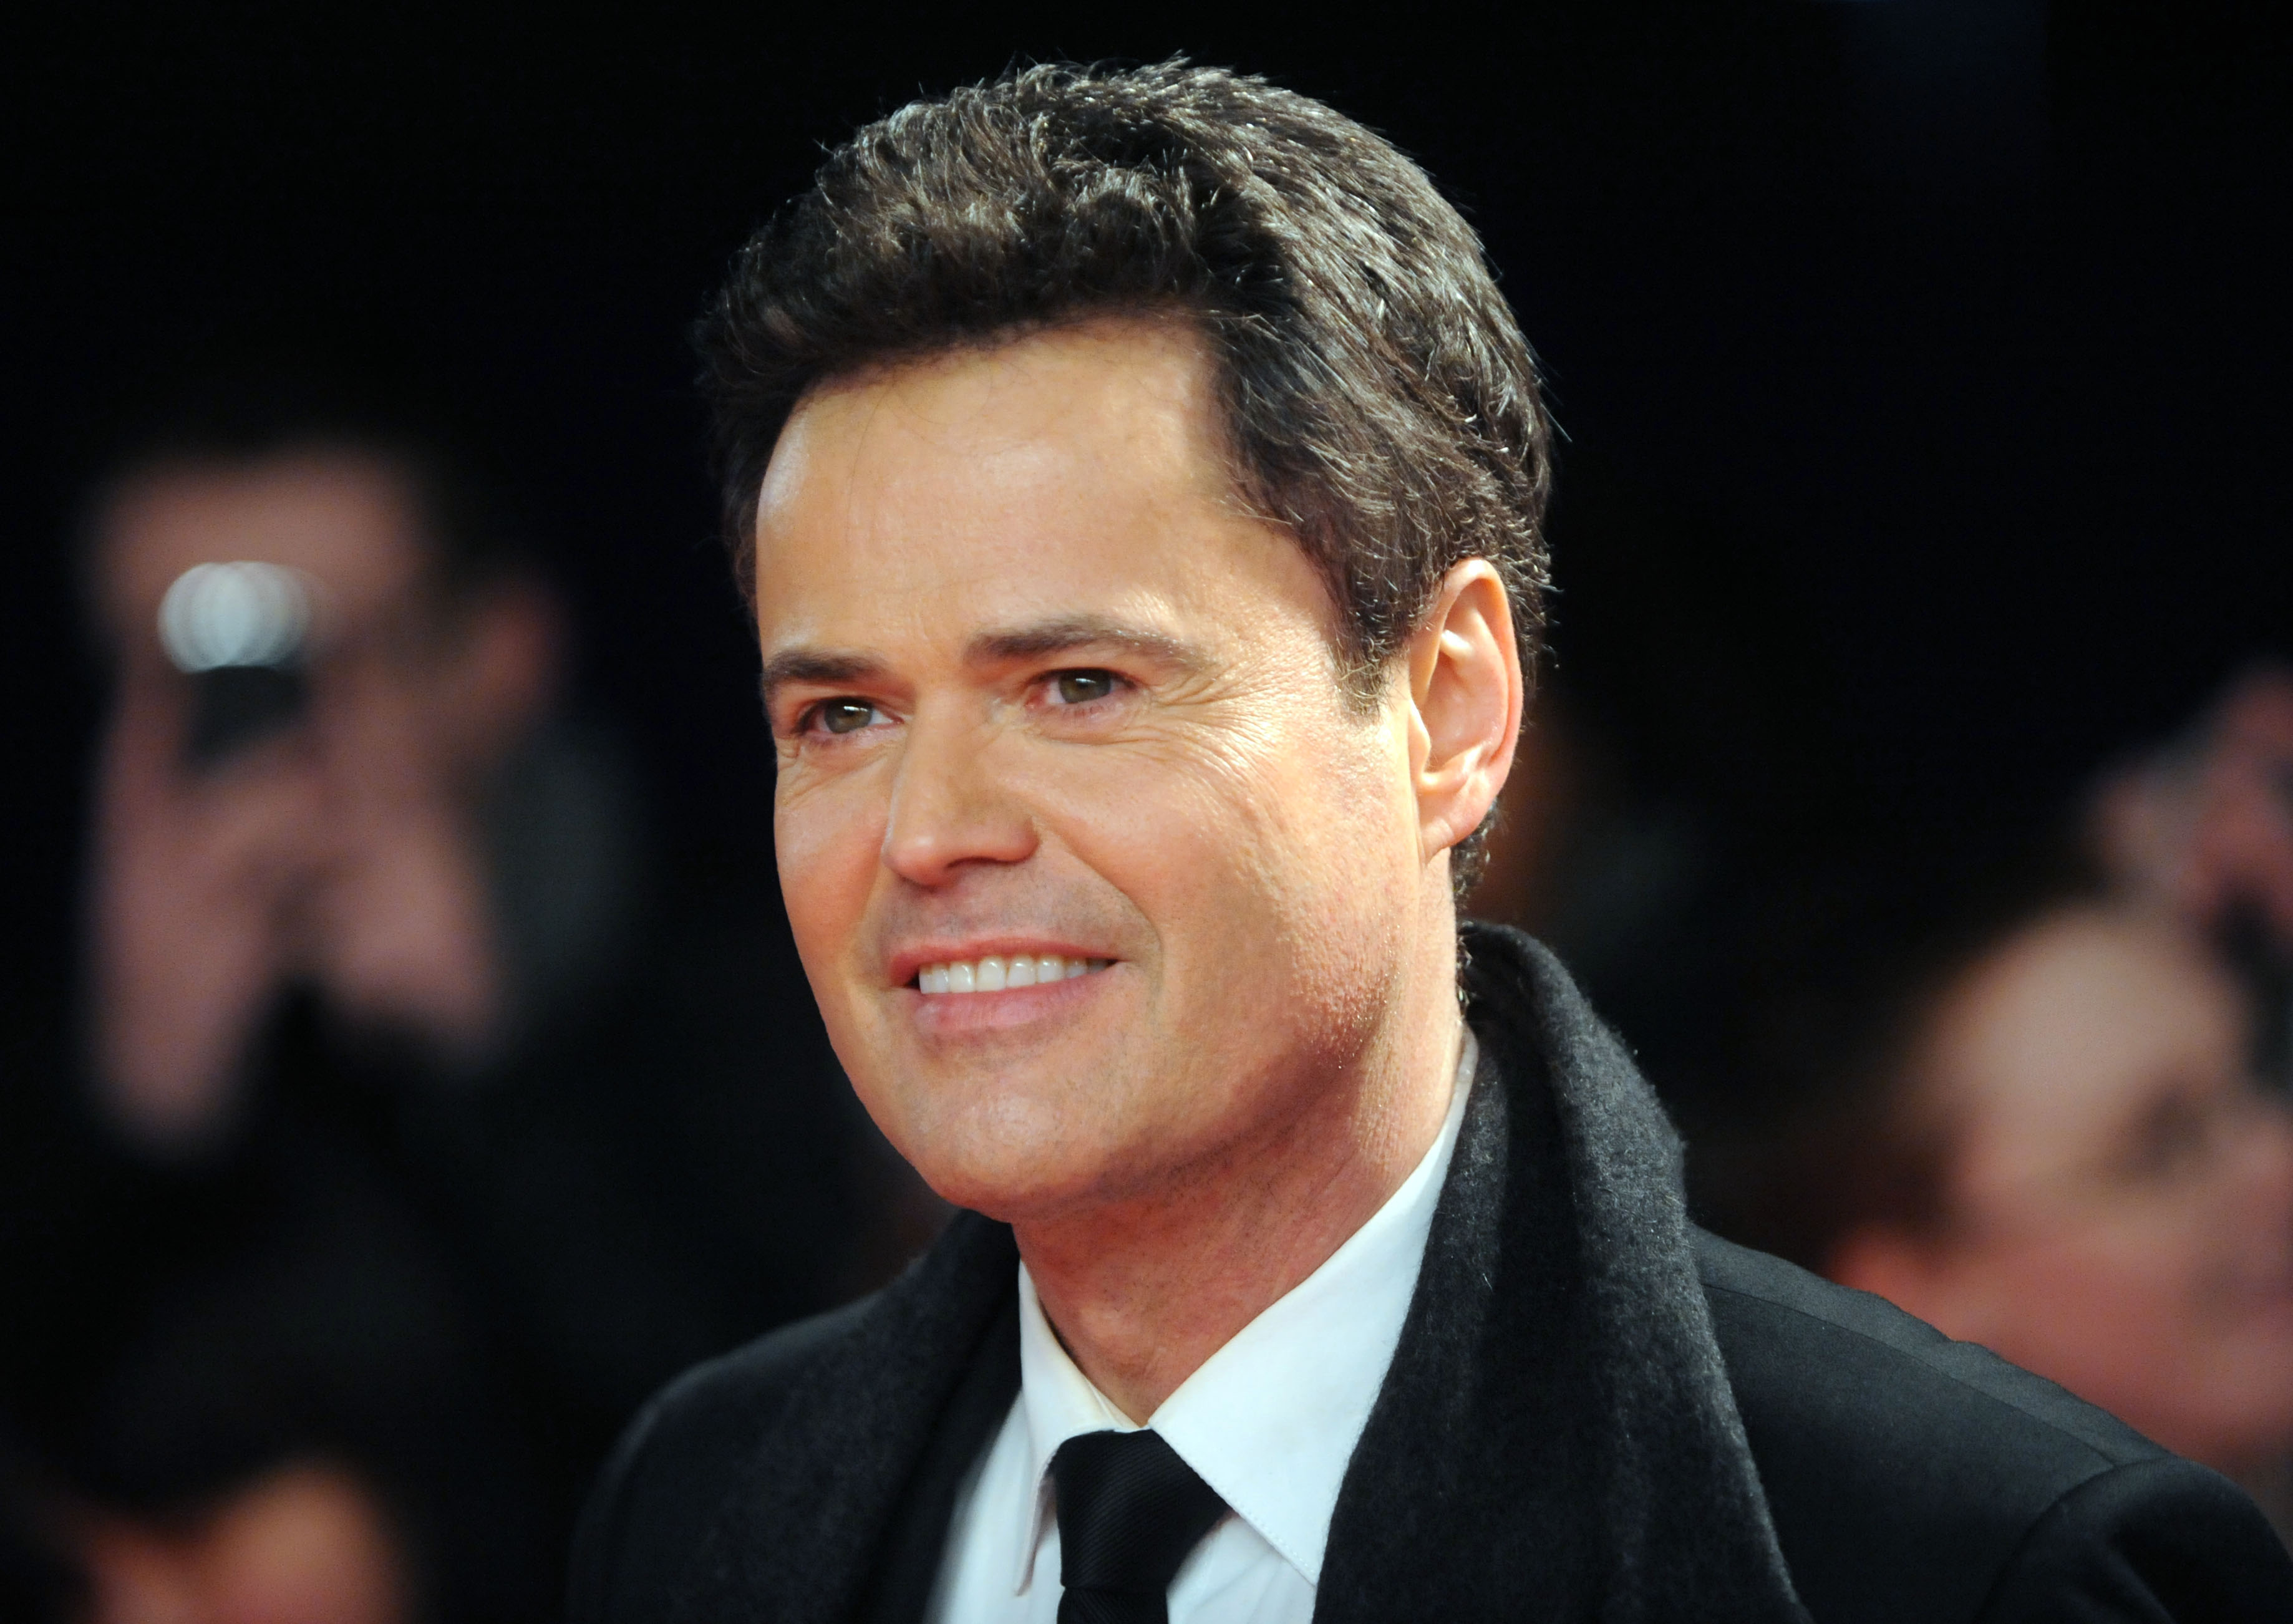 Donny Osmond -- is he The Masked Singer Peacock? Fans think so.